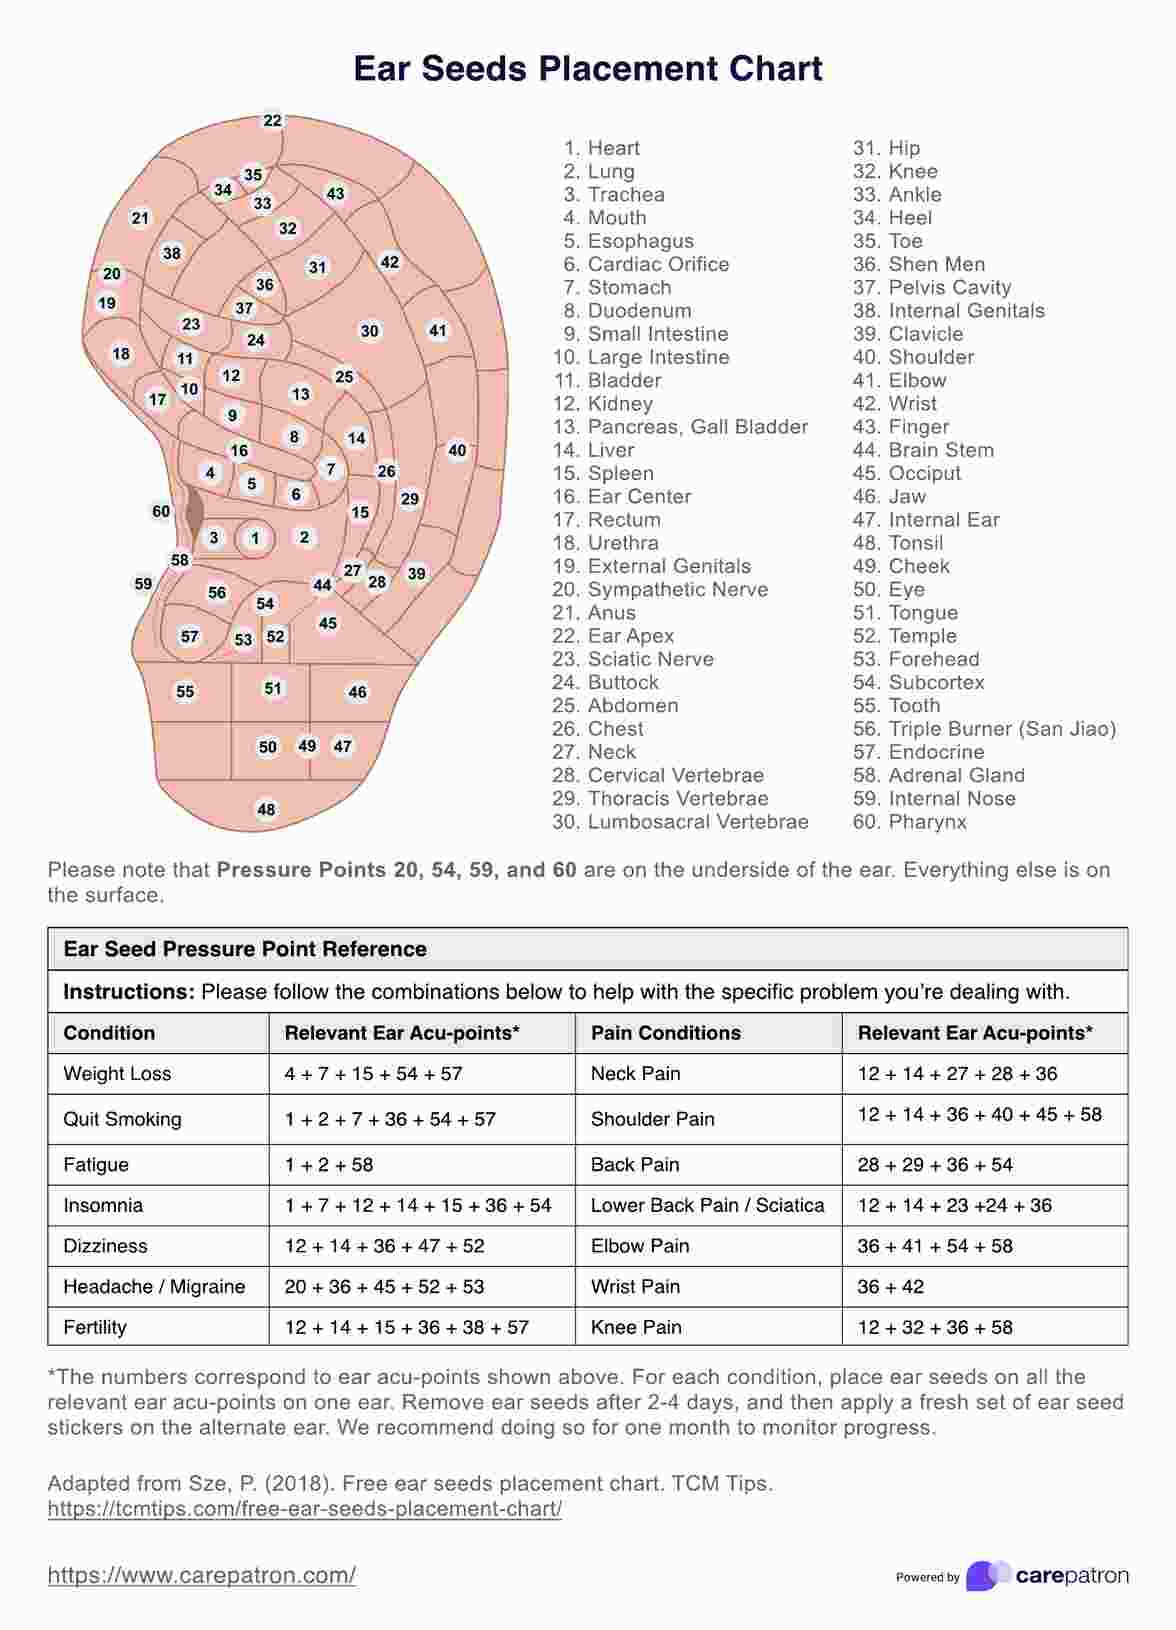 Ear Seeds Placement Chart PDF Example